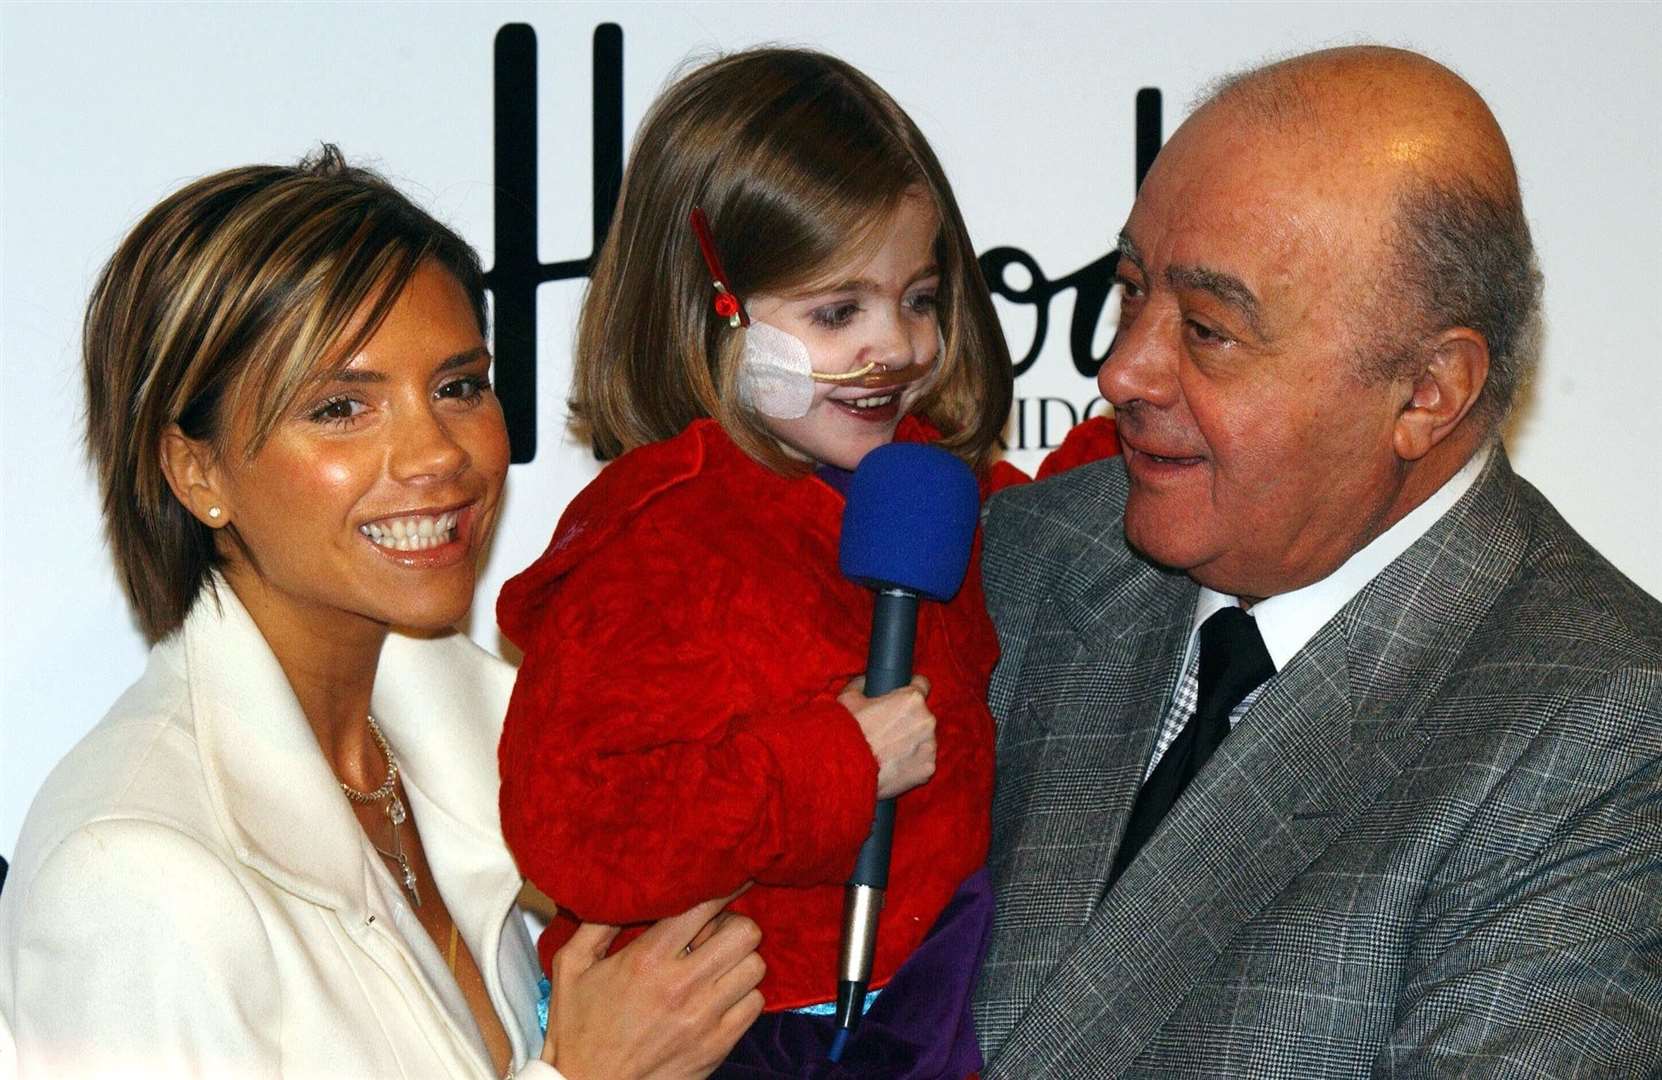 Victoria Beckham and Mohammed Al Fayed help with six-year-old Kirsty Howard from Manchester, who was born with her heart back to front, open the Harrods’ January sales in 2002 (PA)